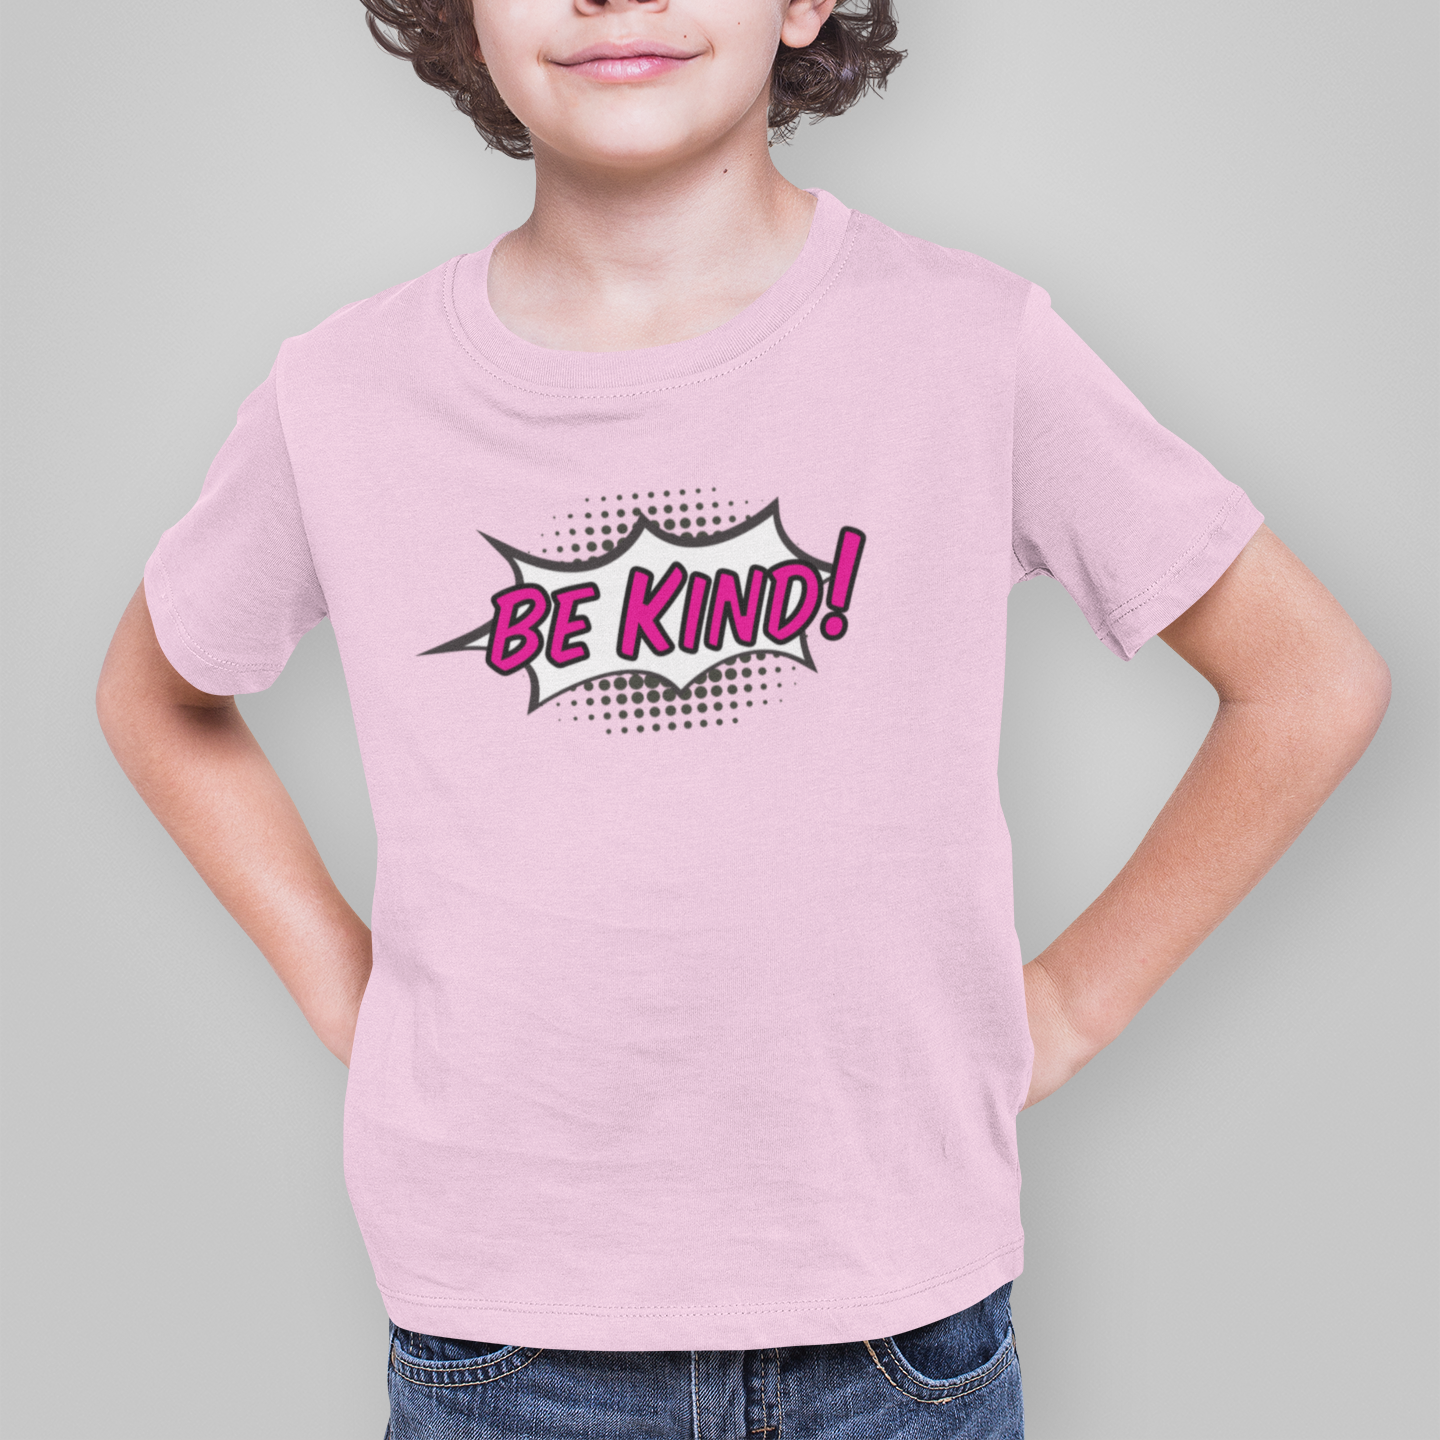 Be Kind Youth T-Shirt